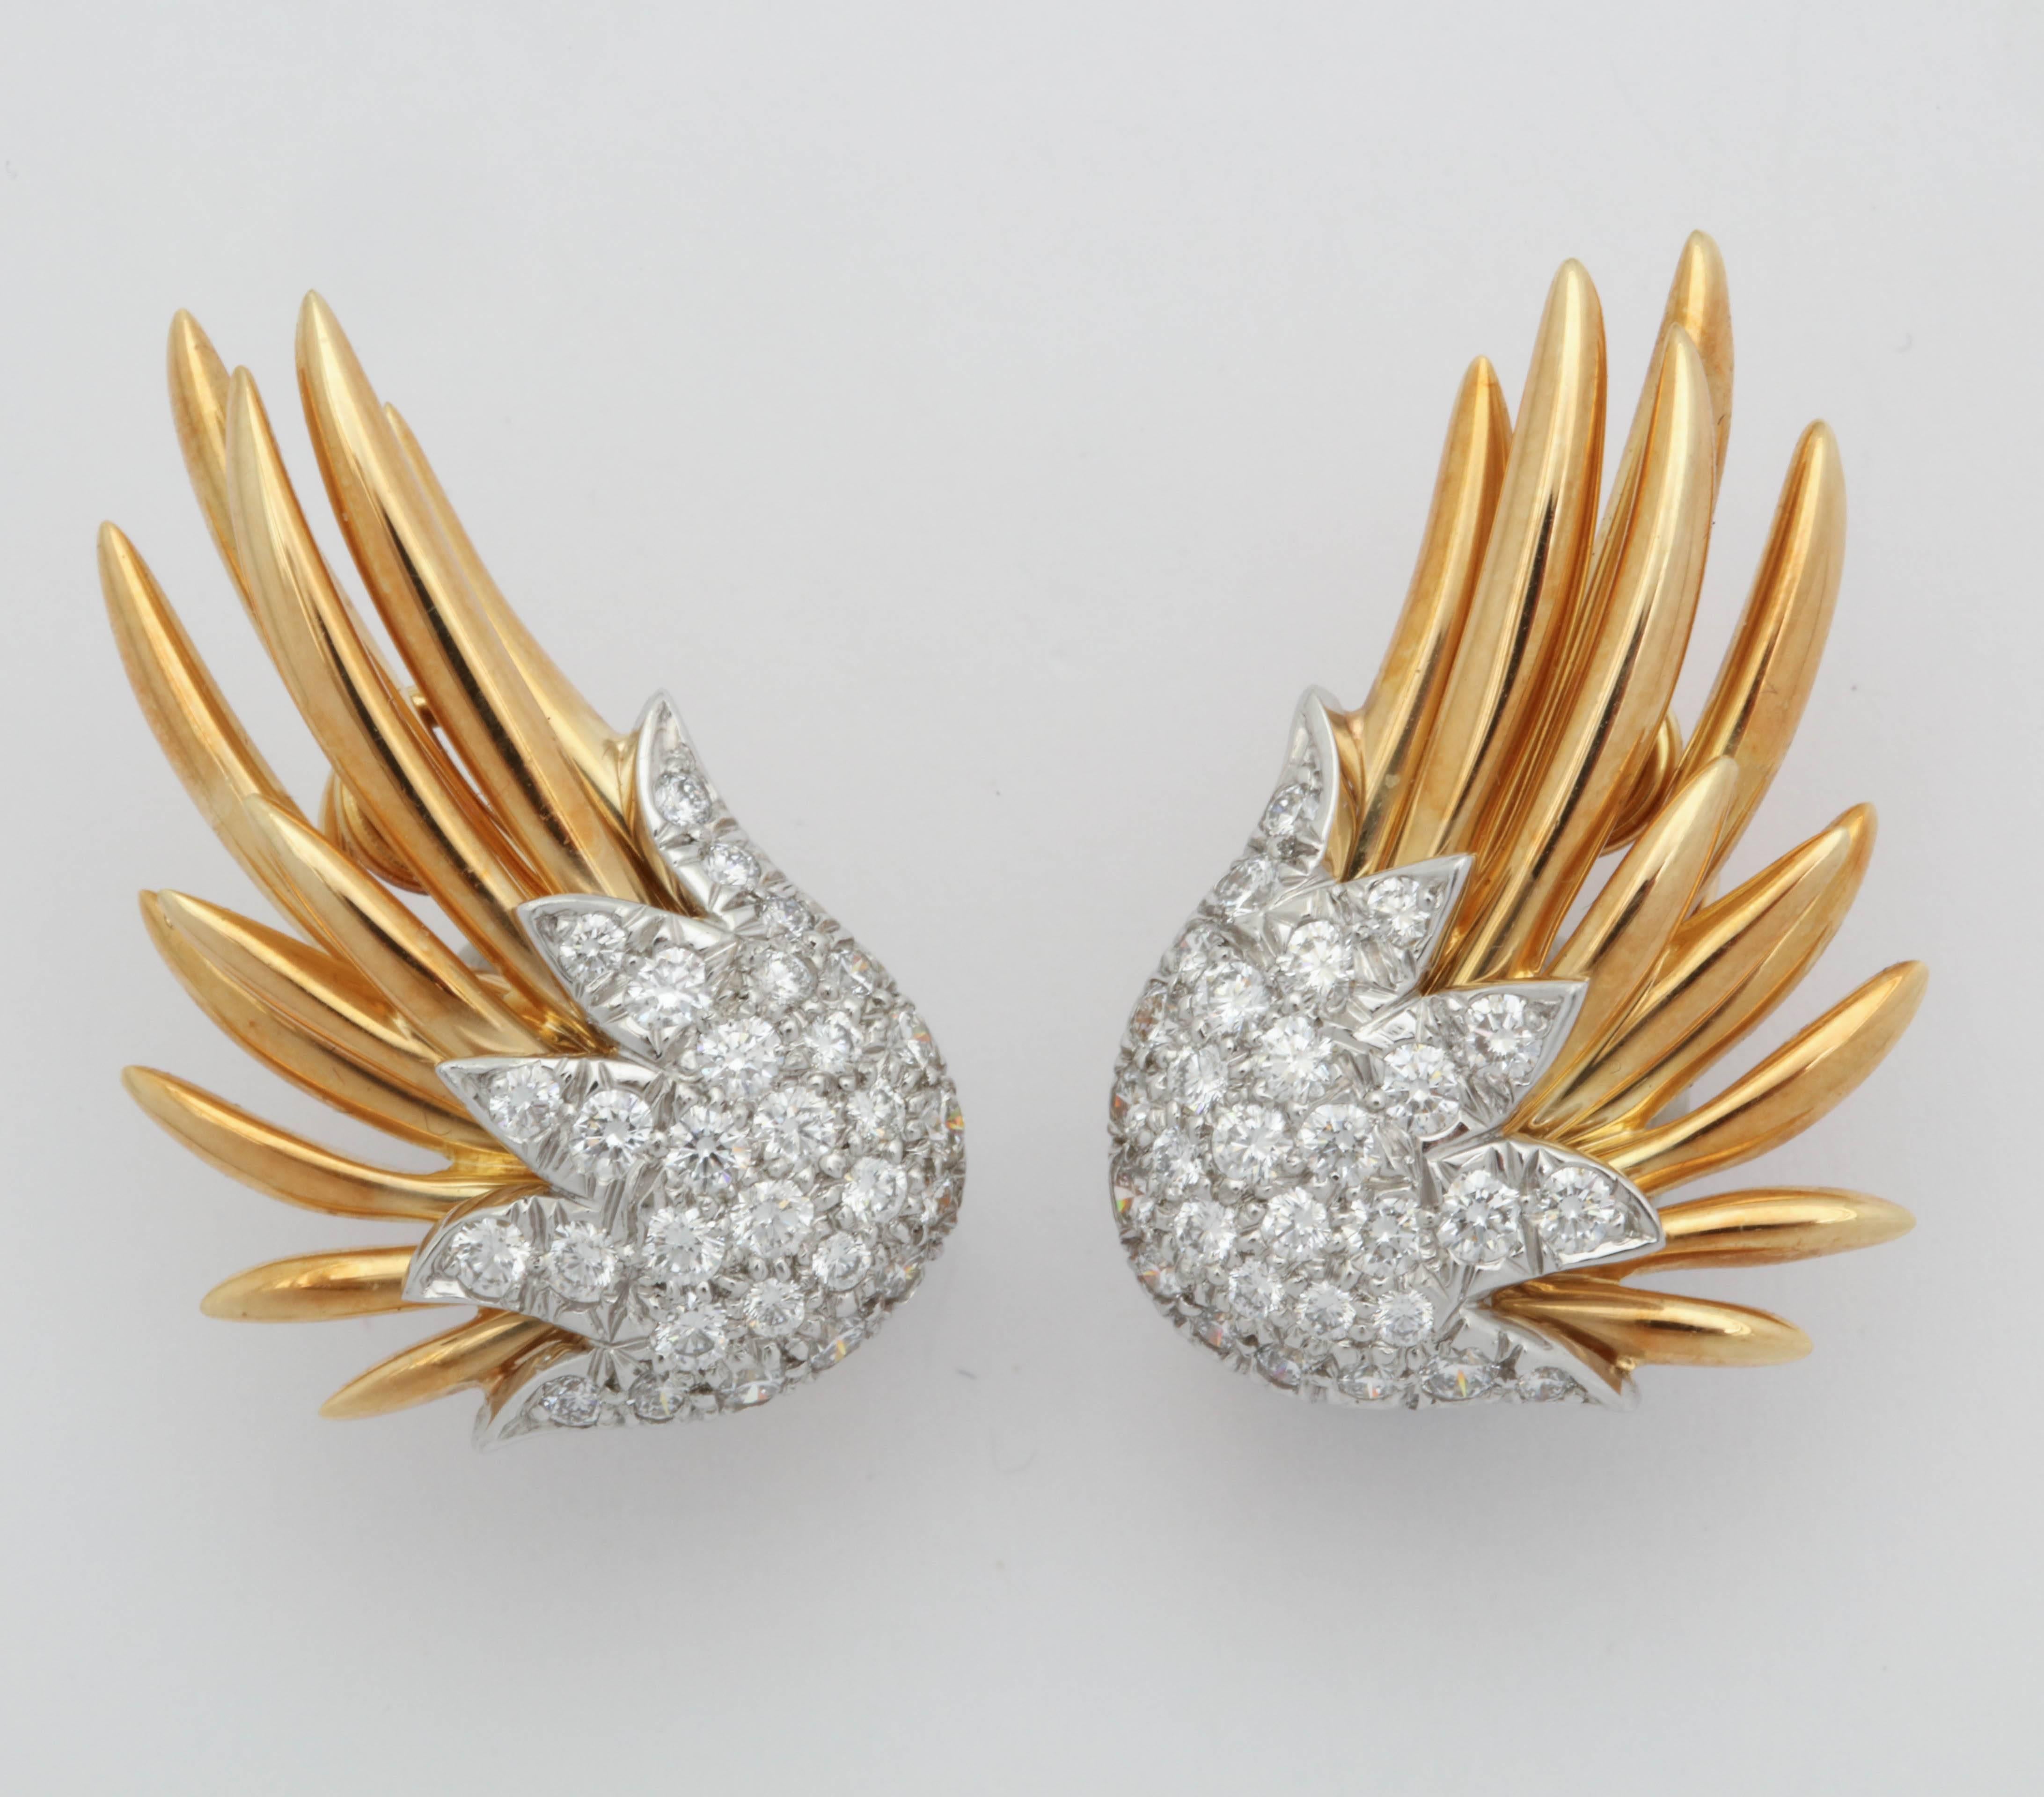 One Pair Of Ladies Flame Design Earclips With Posts Embellished With Approximately 2 Carats Of G-H Quality VVS2 Quality Full Cut Diamonds. Diamonds Are Set In Platinum And Earrings Are Made Out Of Solid 18kt Yellow Gold. This Is A Well sought After